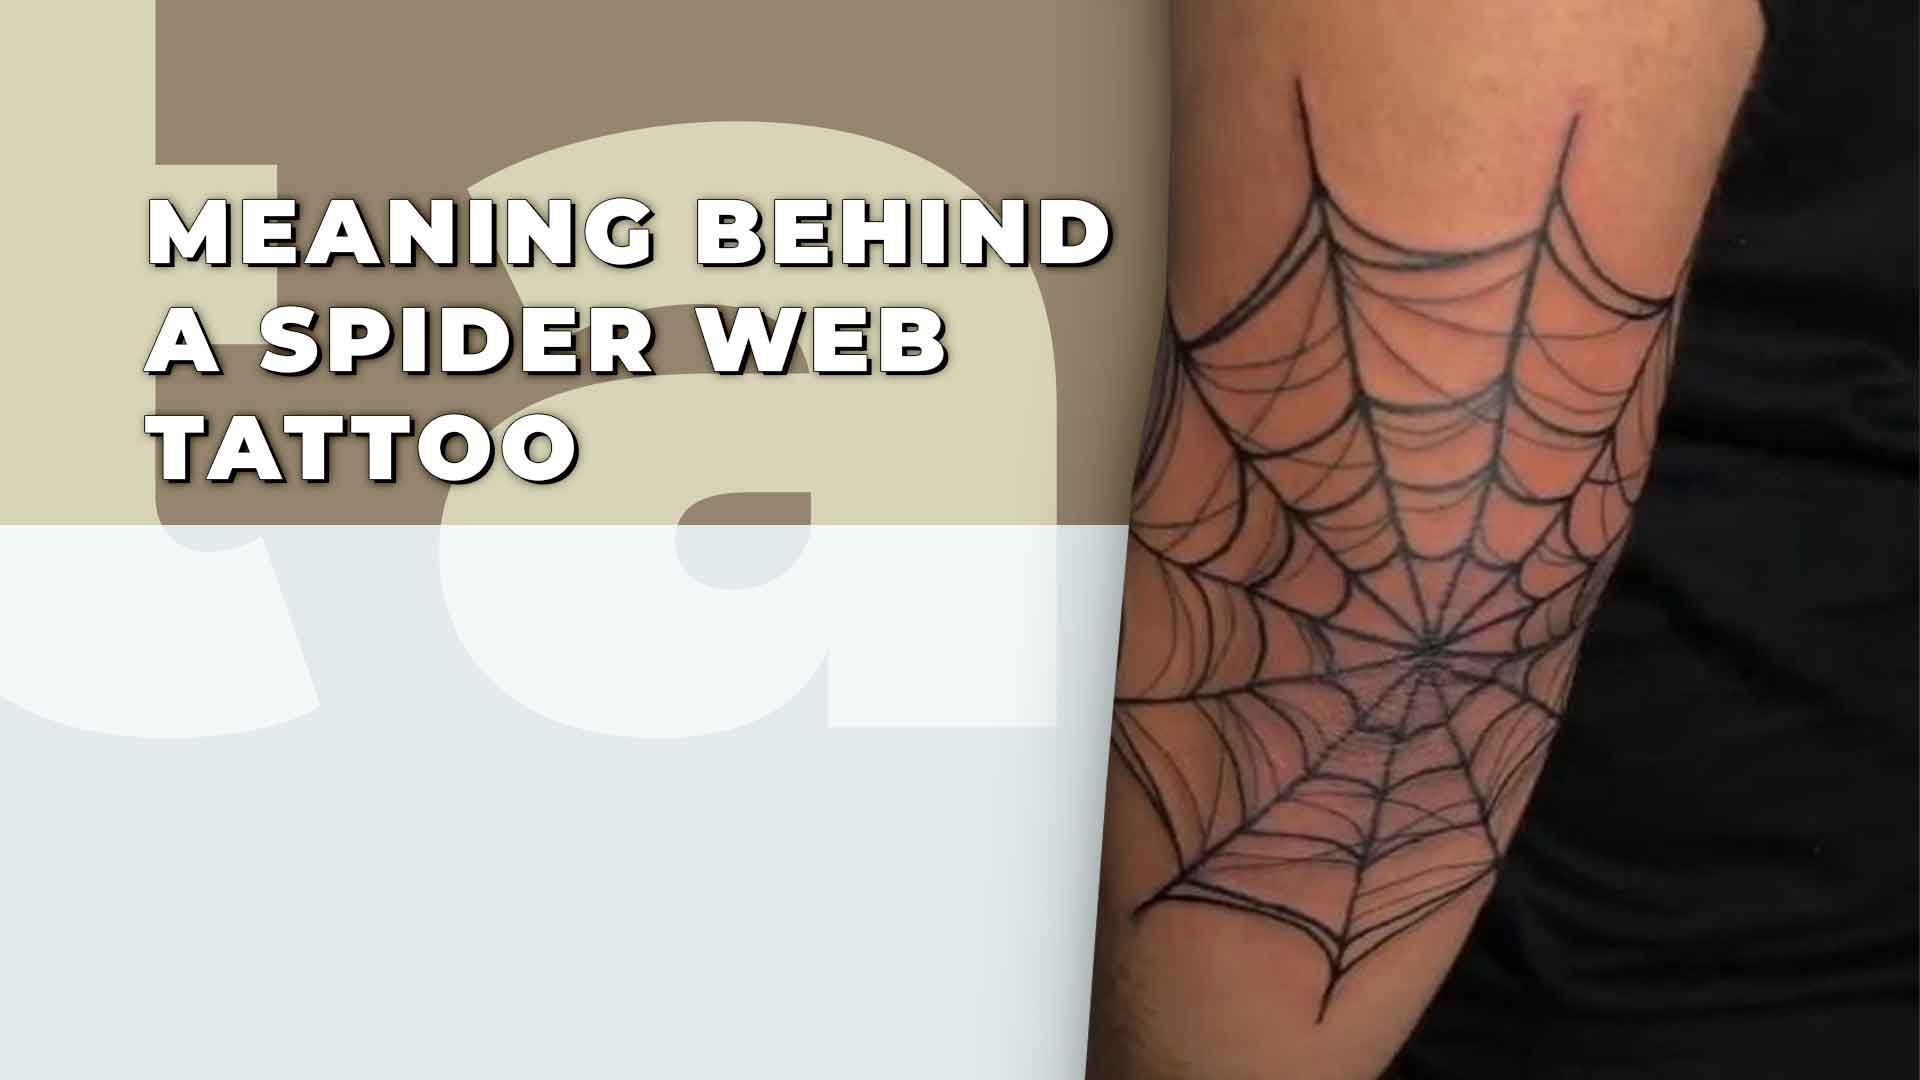 What is the meaning of a spider web tattoo on your elbow? - Quora